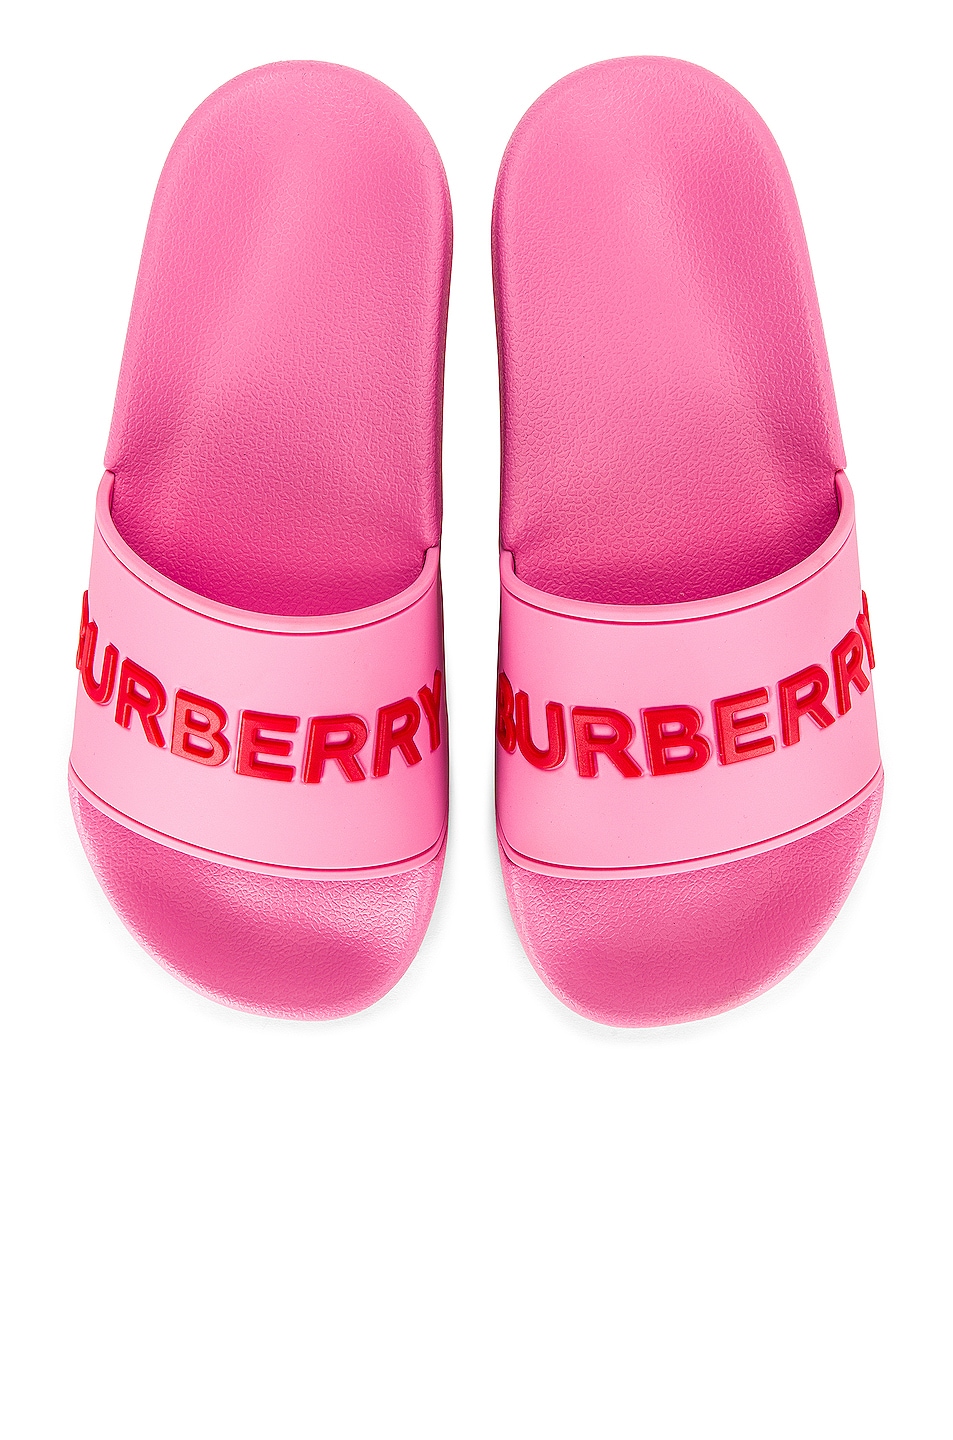 Burberry Furley Text Slides in Bubble Gum Pink | FWRD